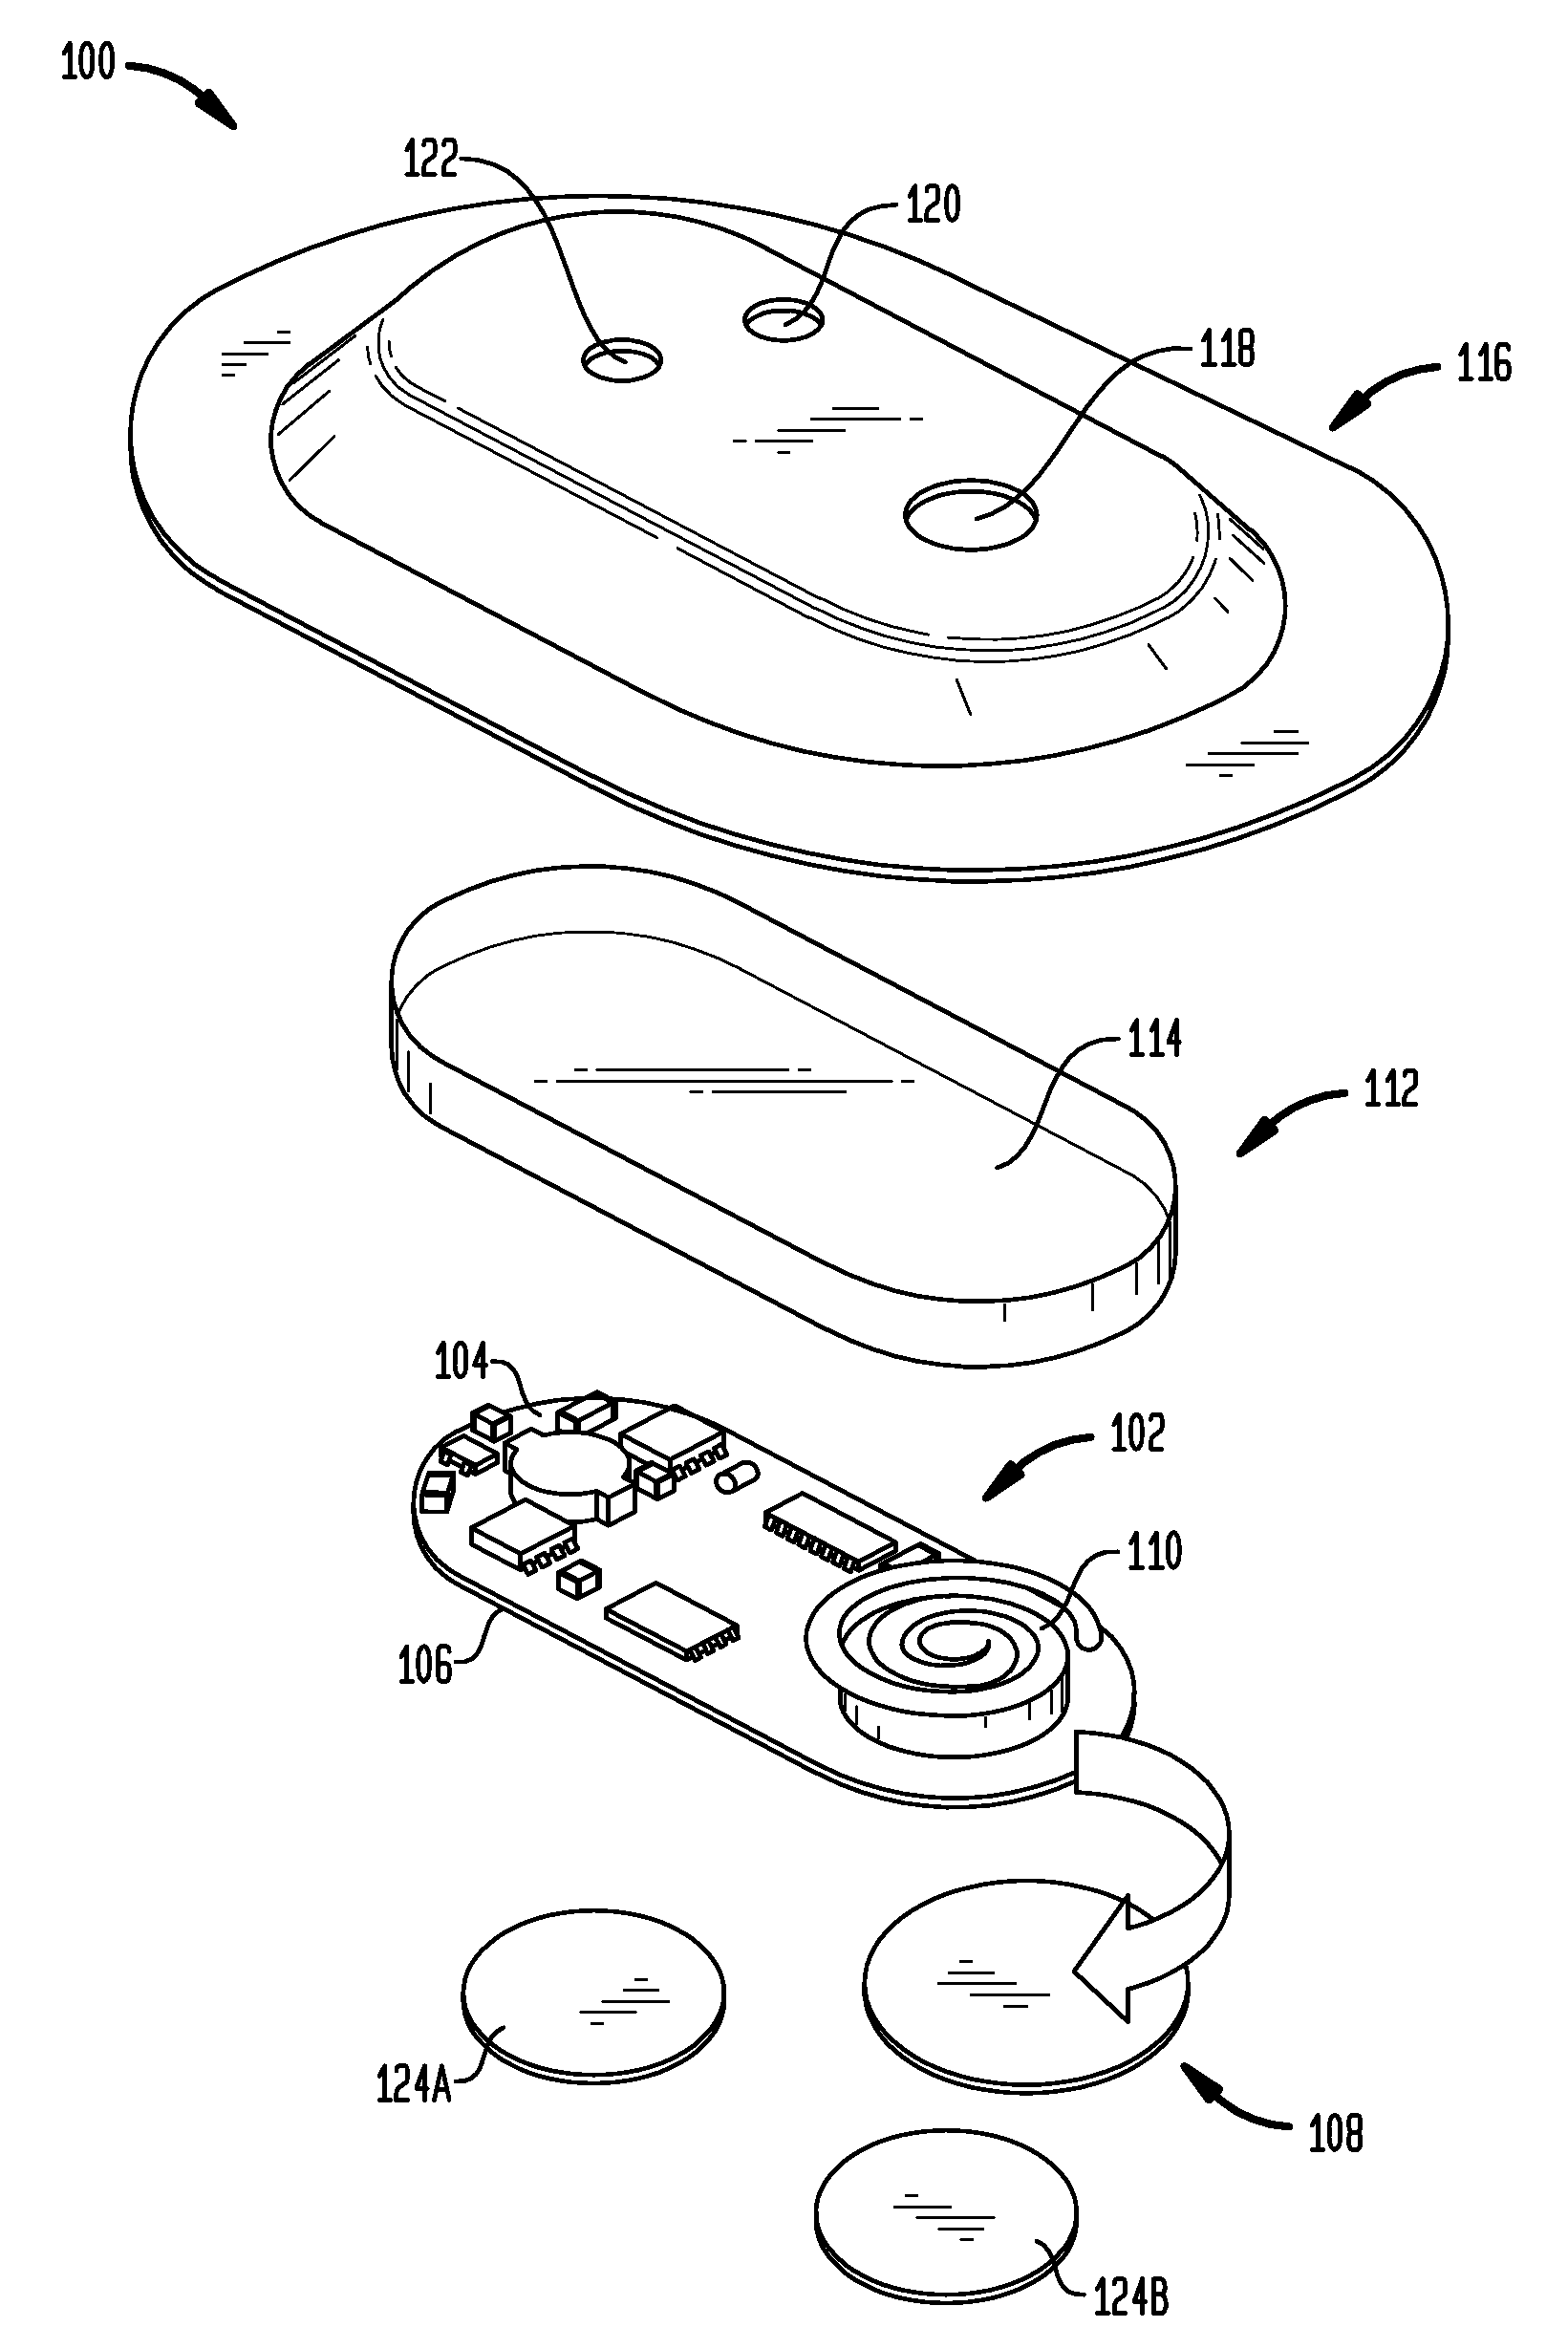 Nerve Stimulation Patches And Methods For Stimulating Selected Nerves